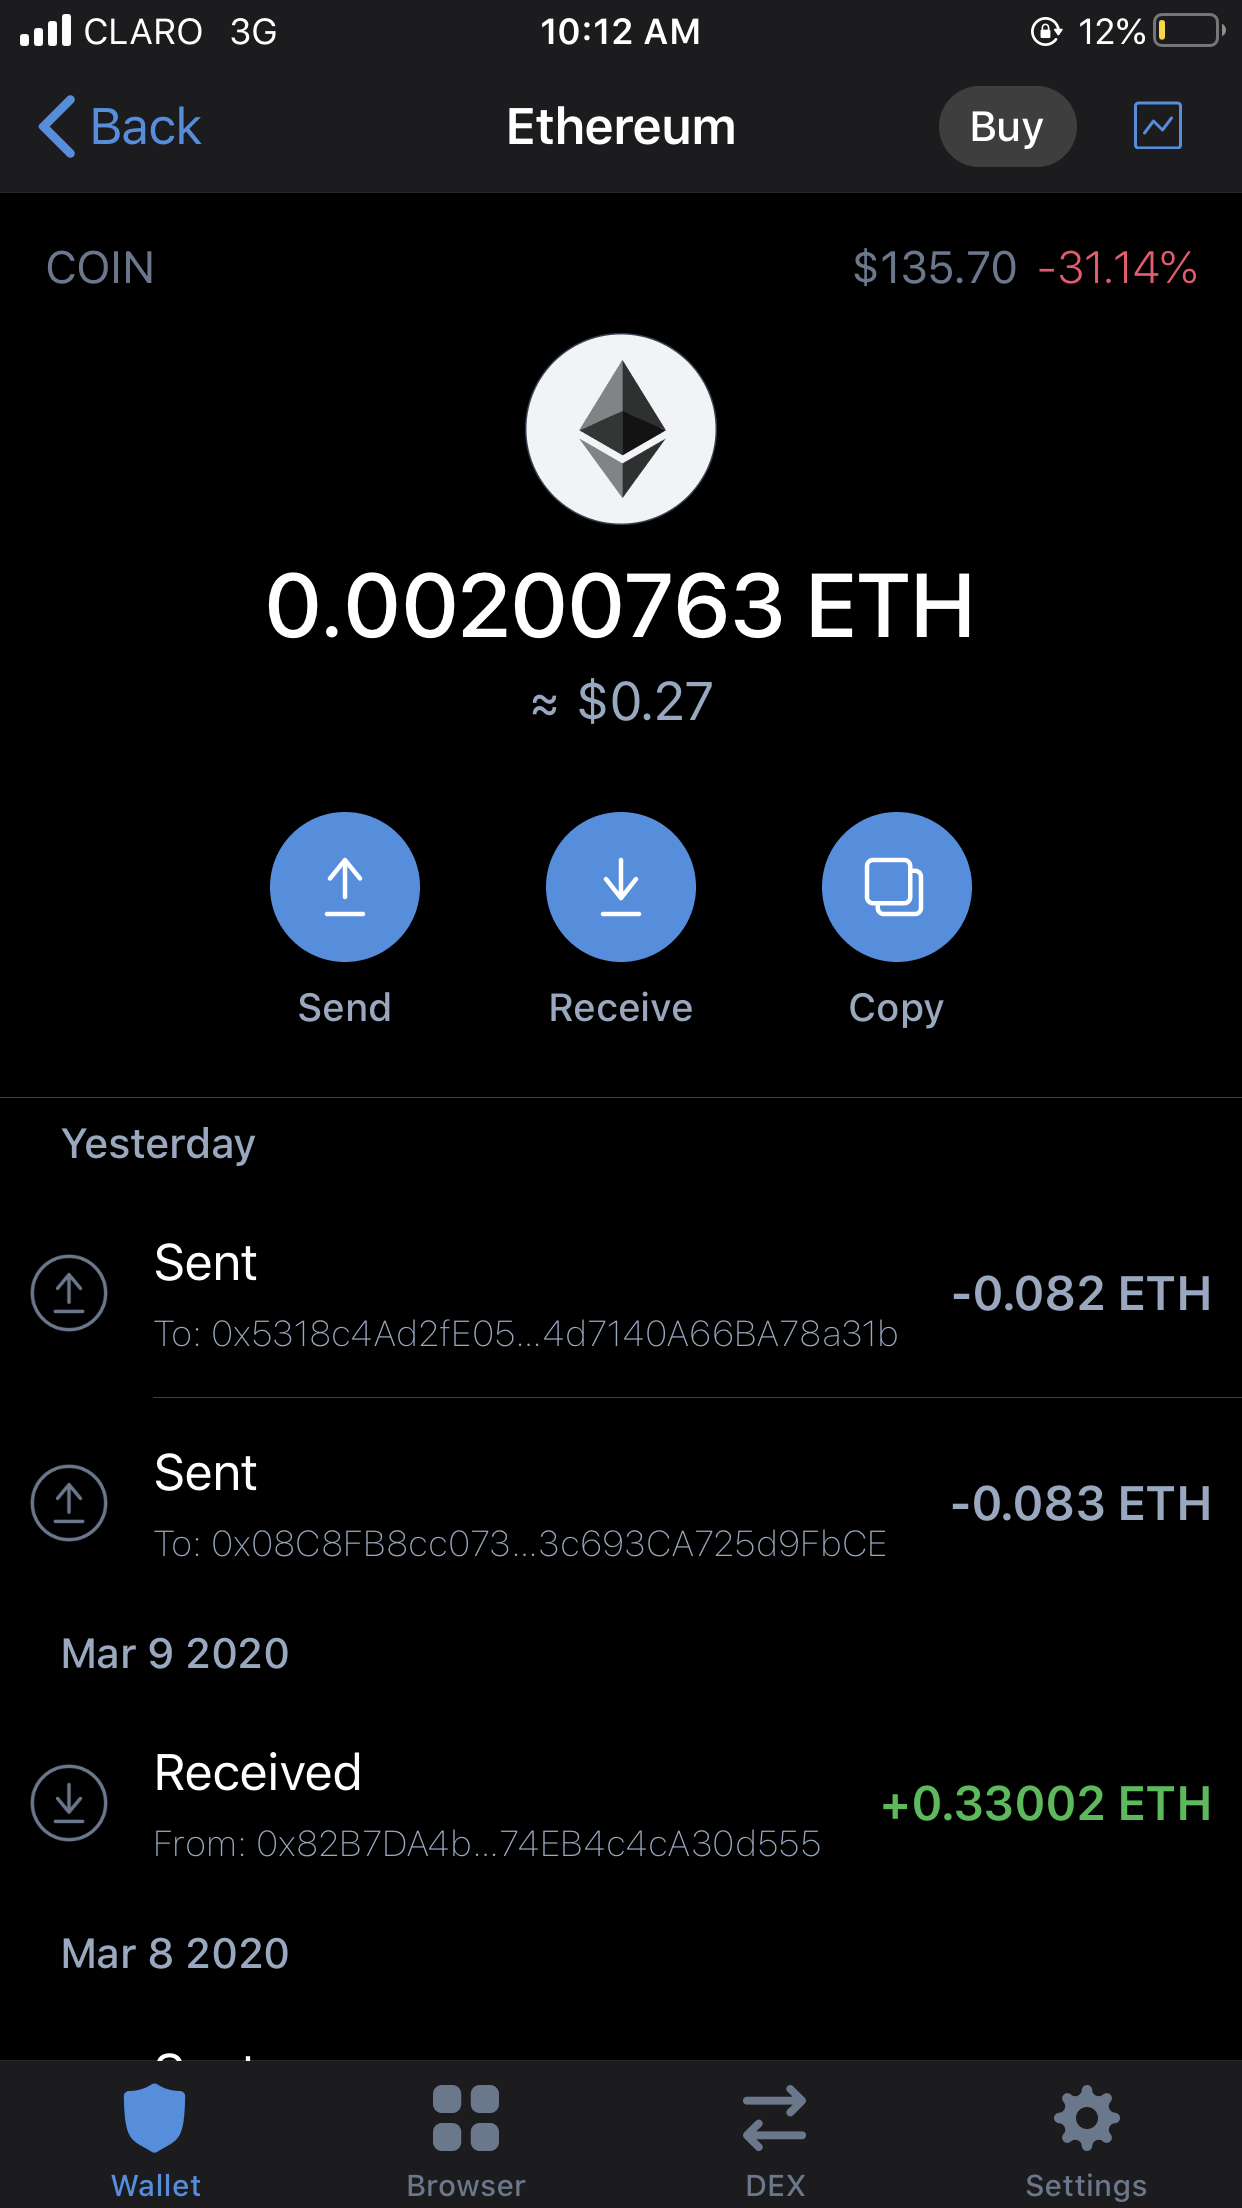 what if i sent eth in wrong address